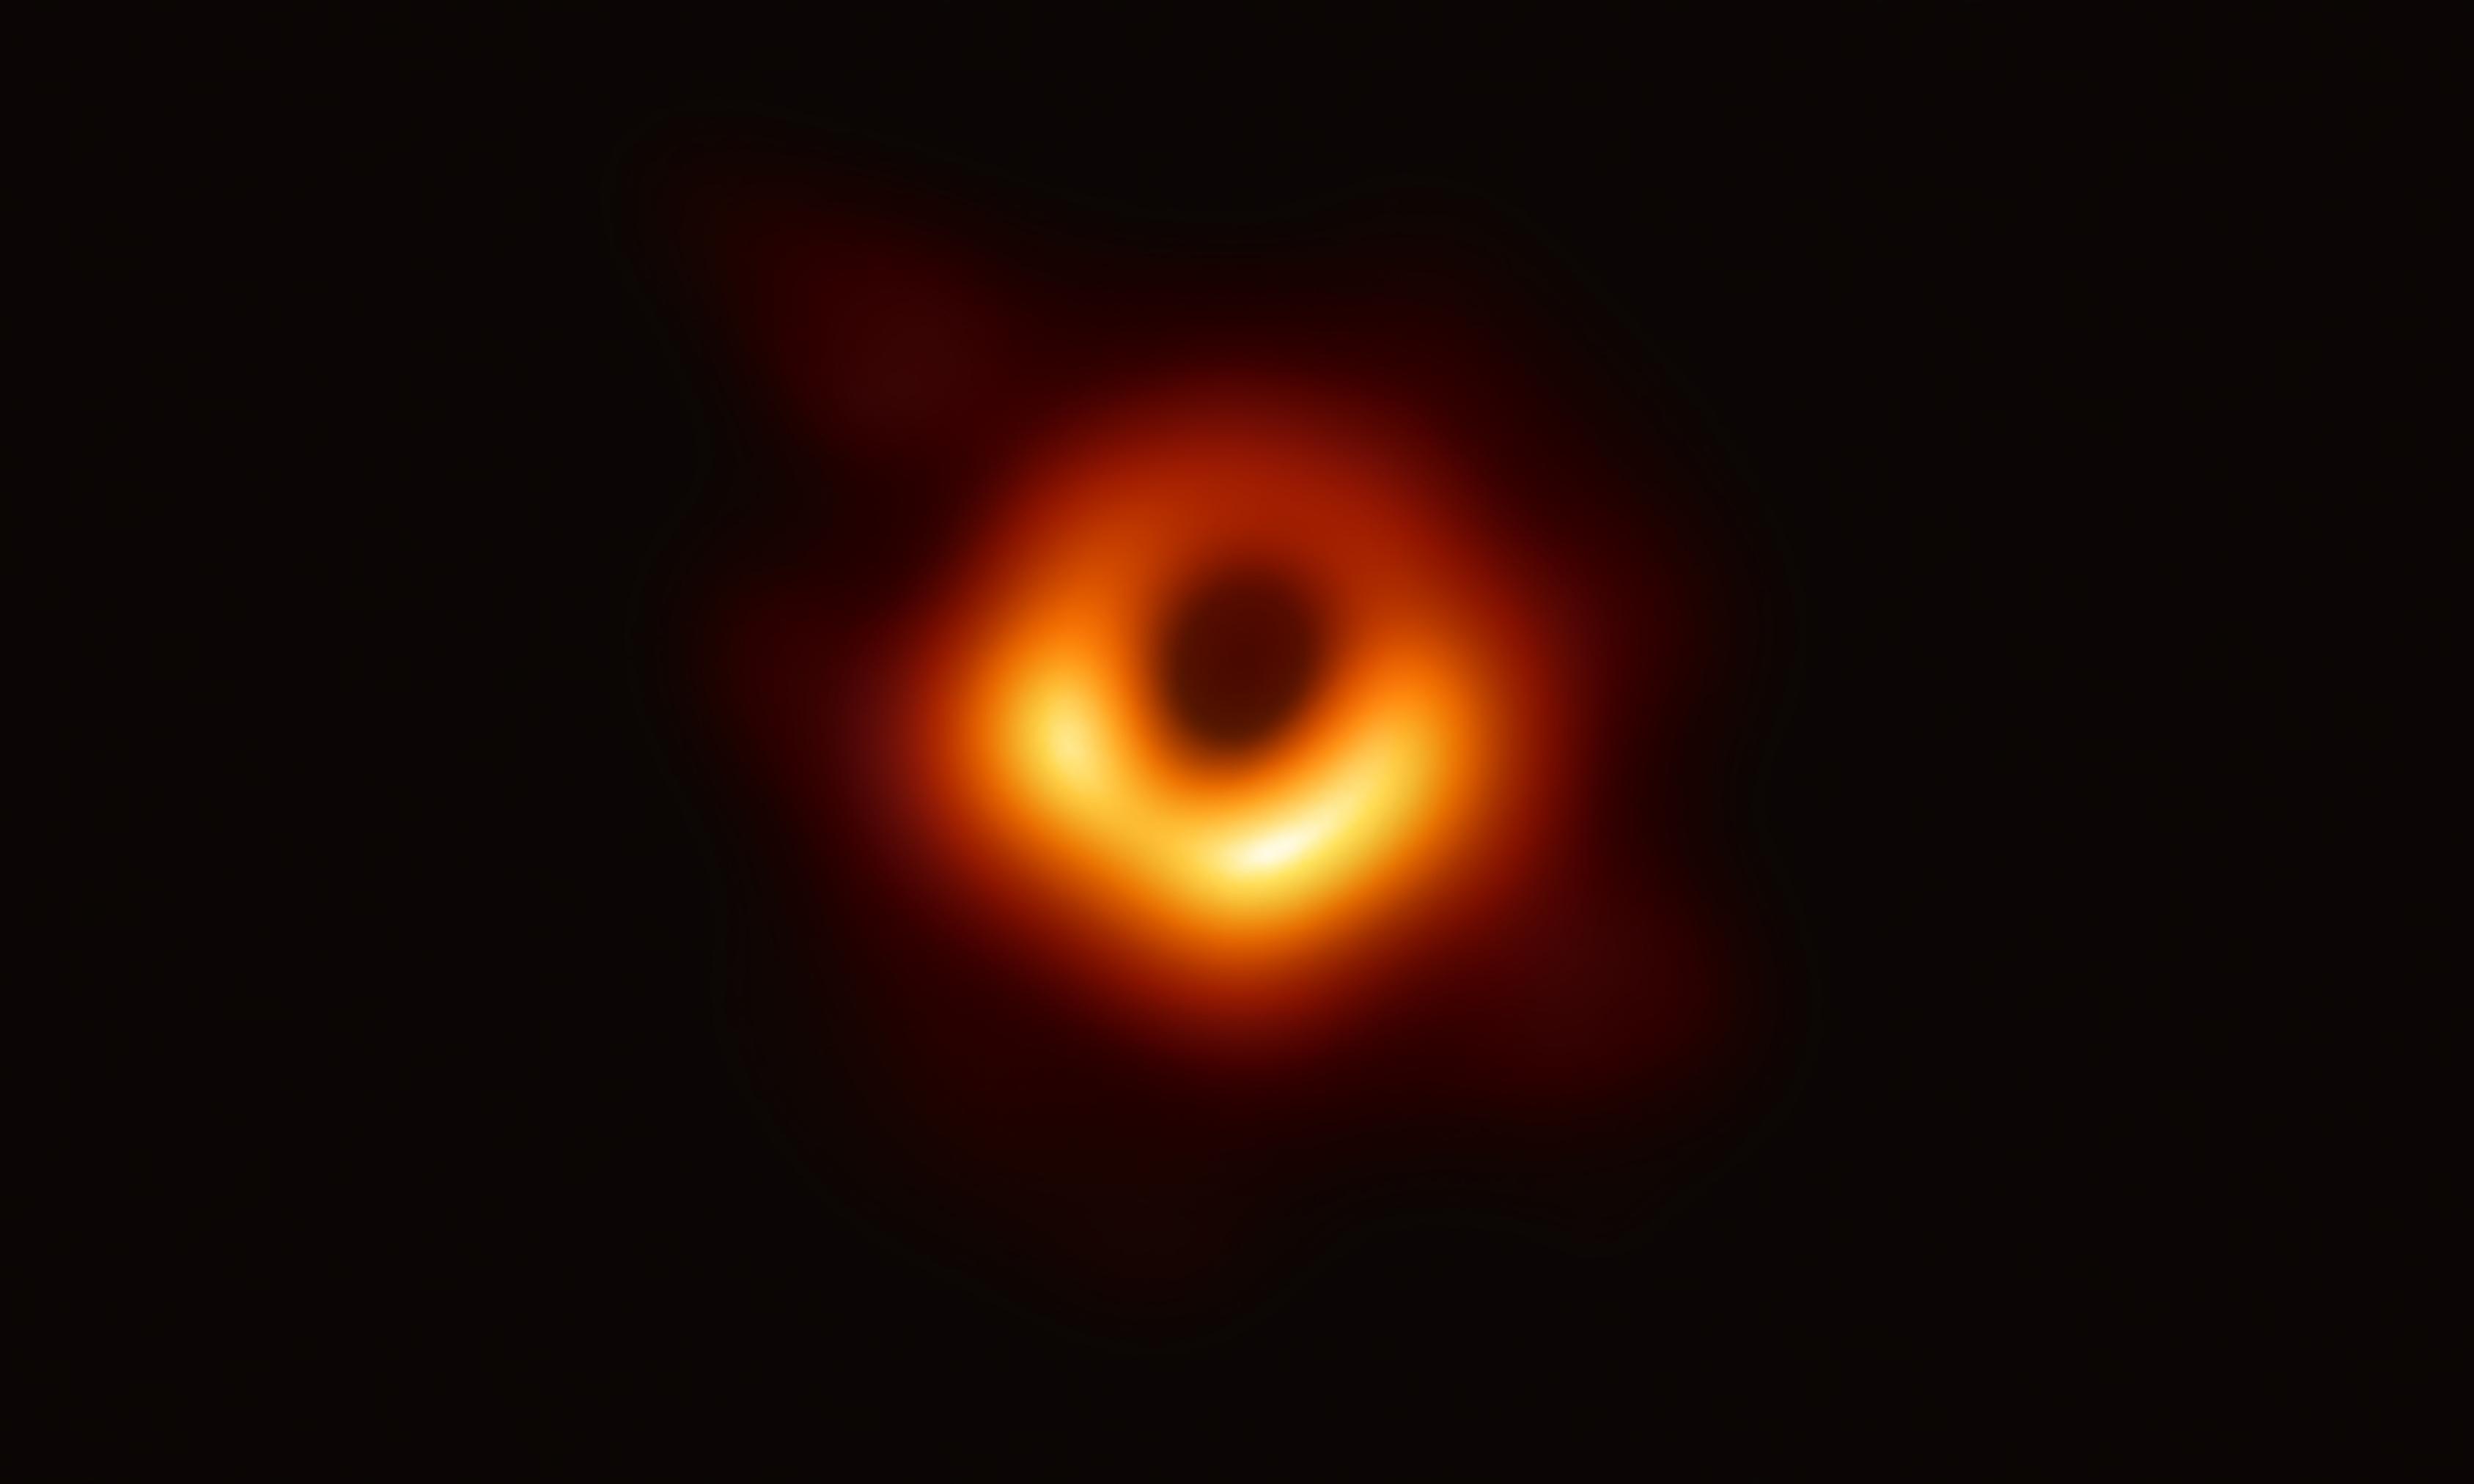 Cover image of Breakthrough Prize awarded to black hole image team